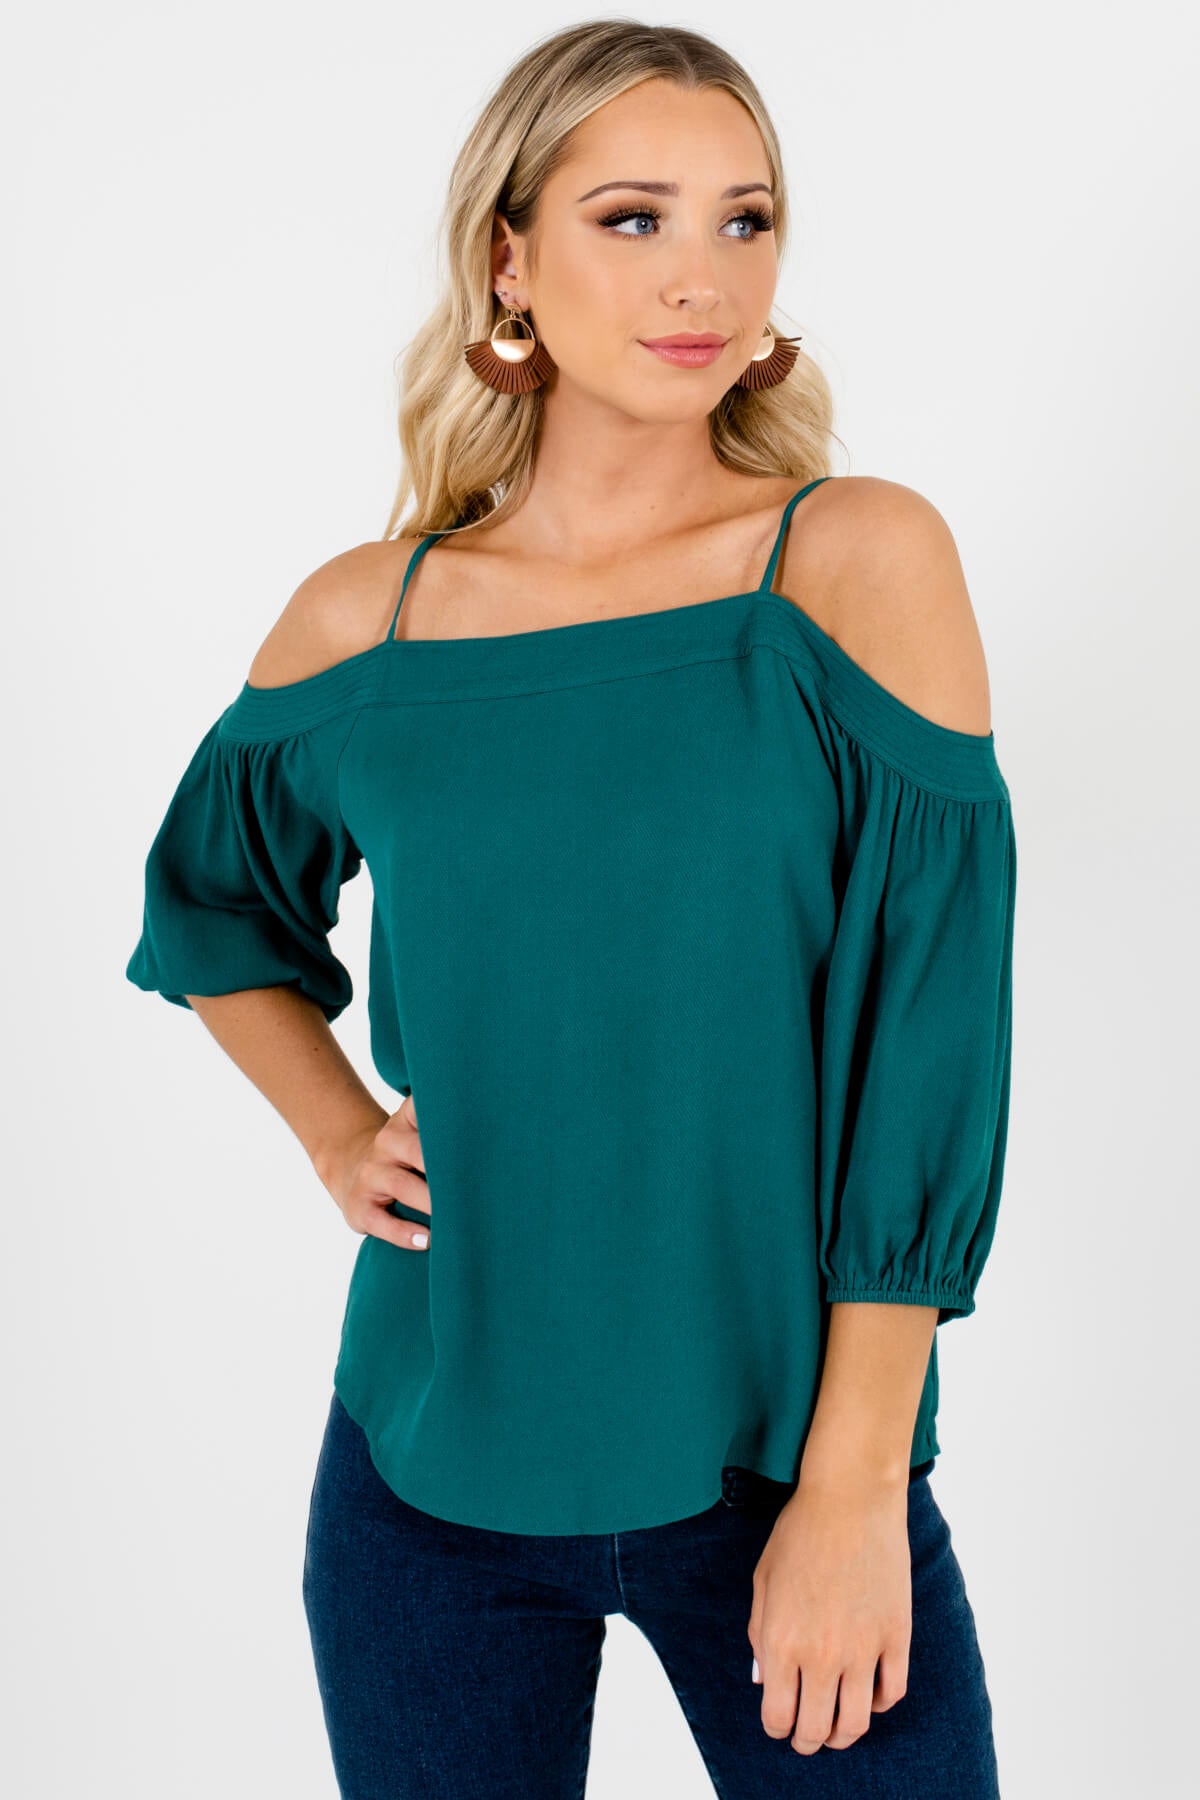 Teal Green Cold Shoulder Style Boutique Tops for Women